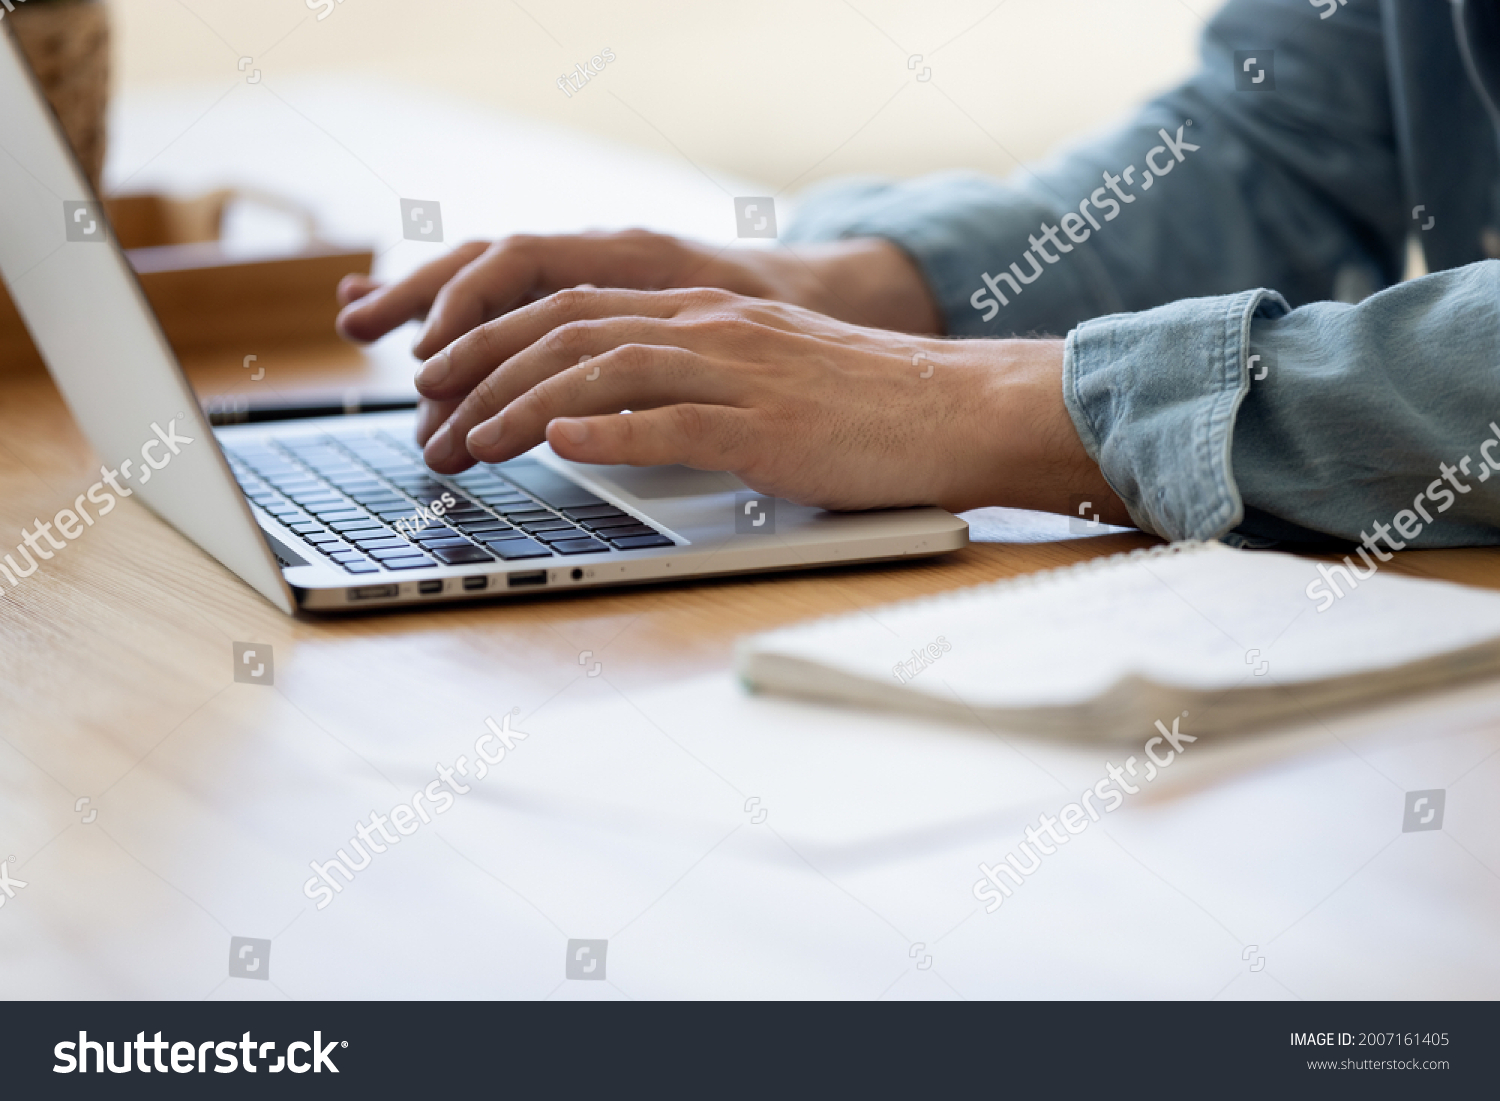 Close up view male hands writes on laptop. Entrepreneur man sit at desk work on modern wireless notebook, do remote telecommute, search information on internet, professional application usage concept #2007161405